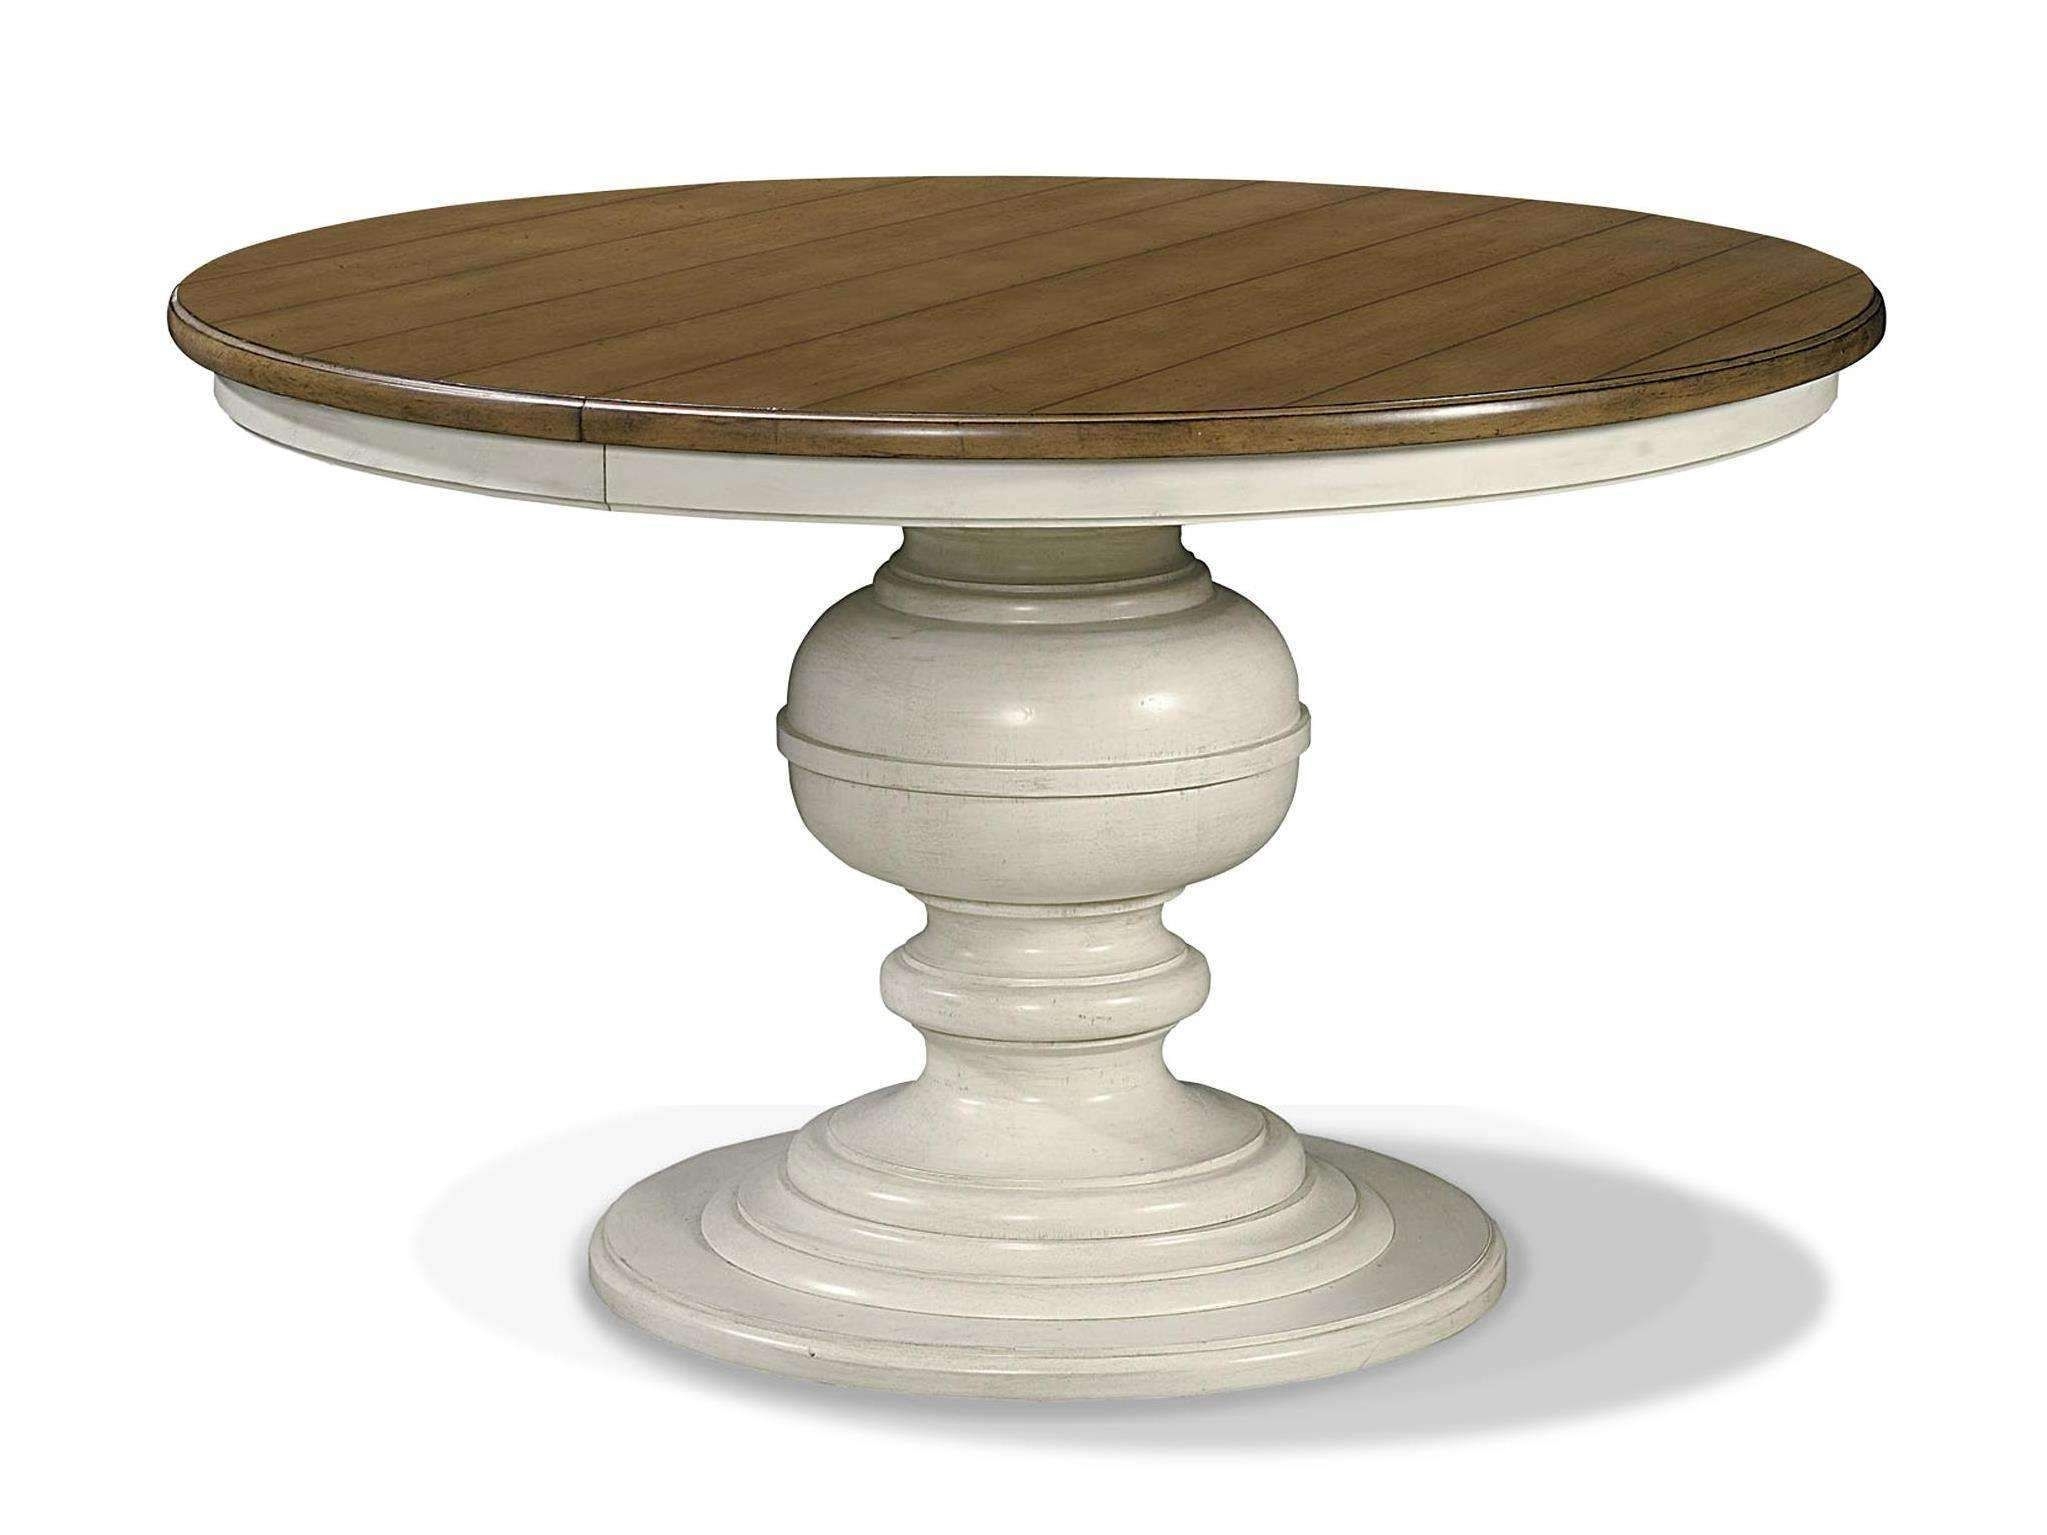 The southern home radley round dining table in cotton